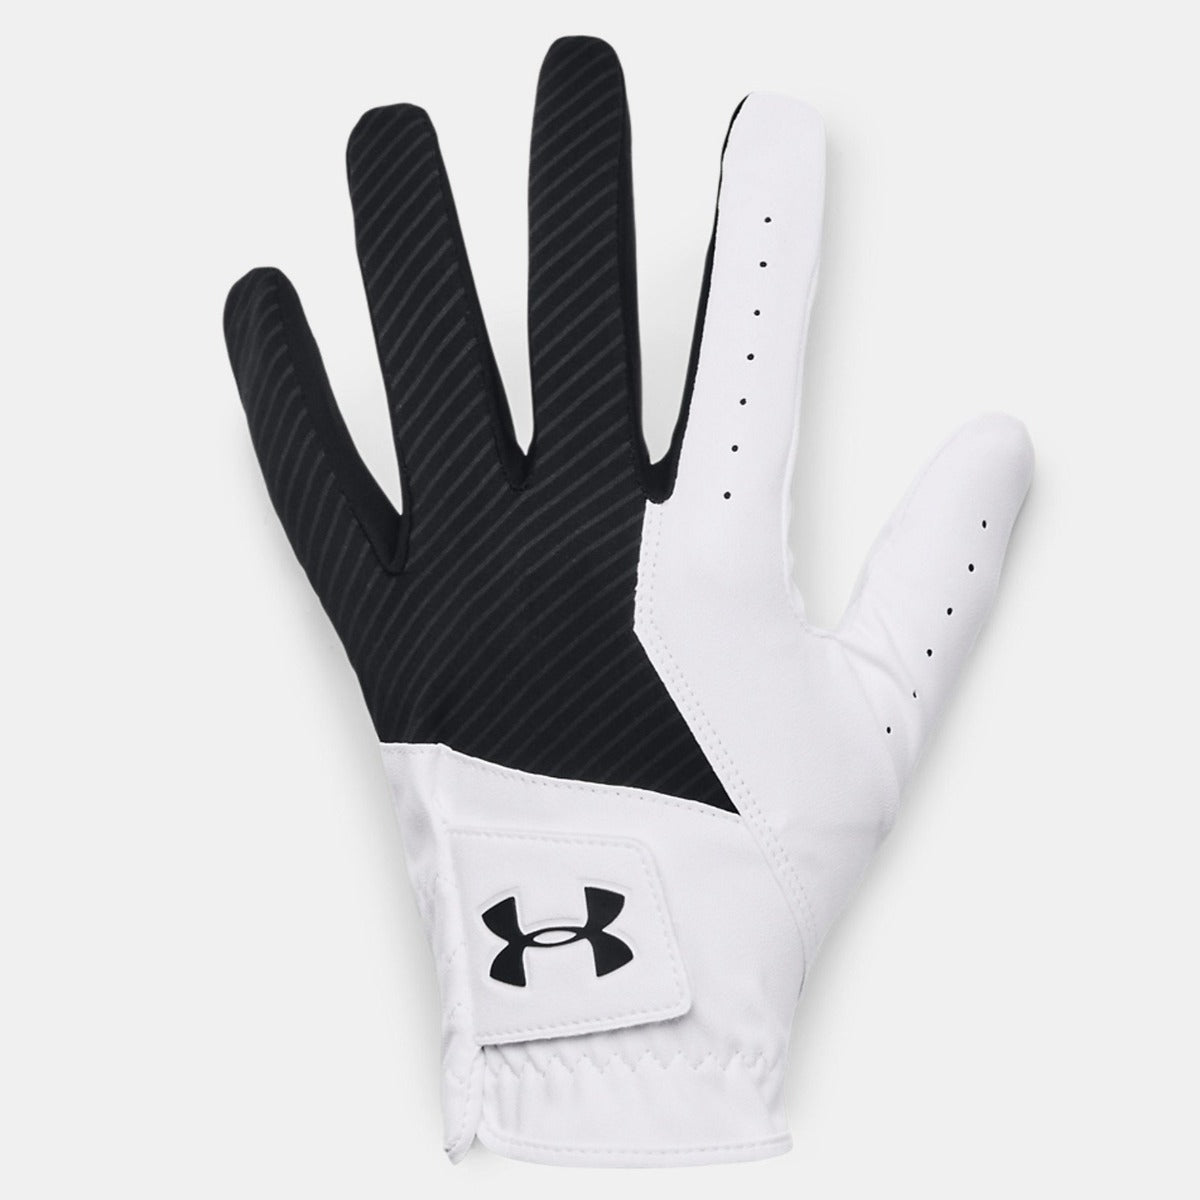 Under Armour Medal All Weather Glove Men's Left Hand